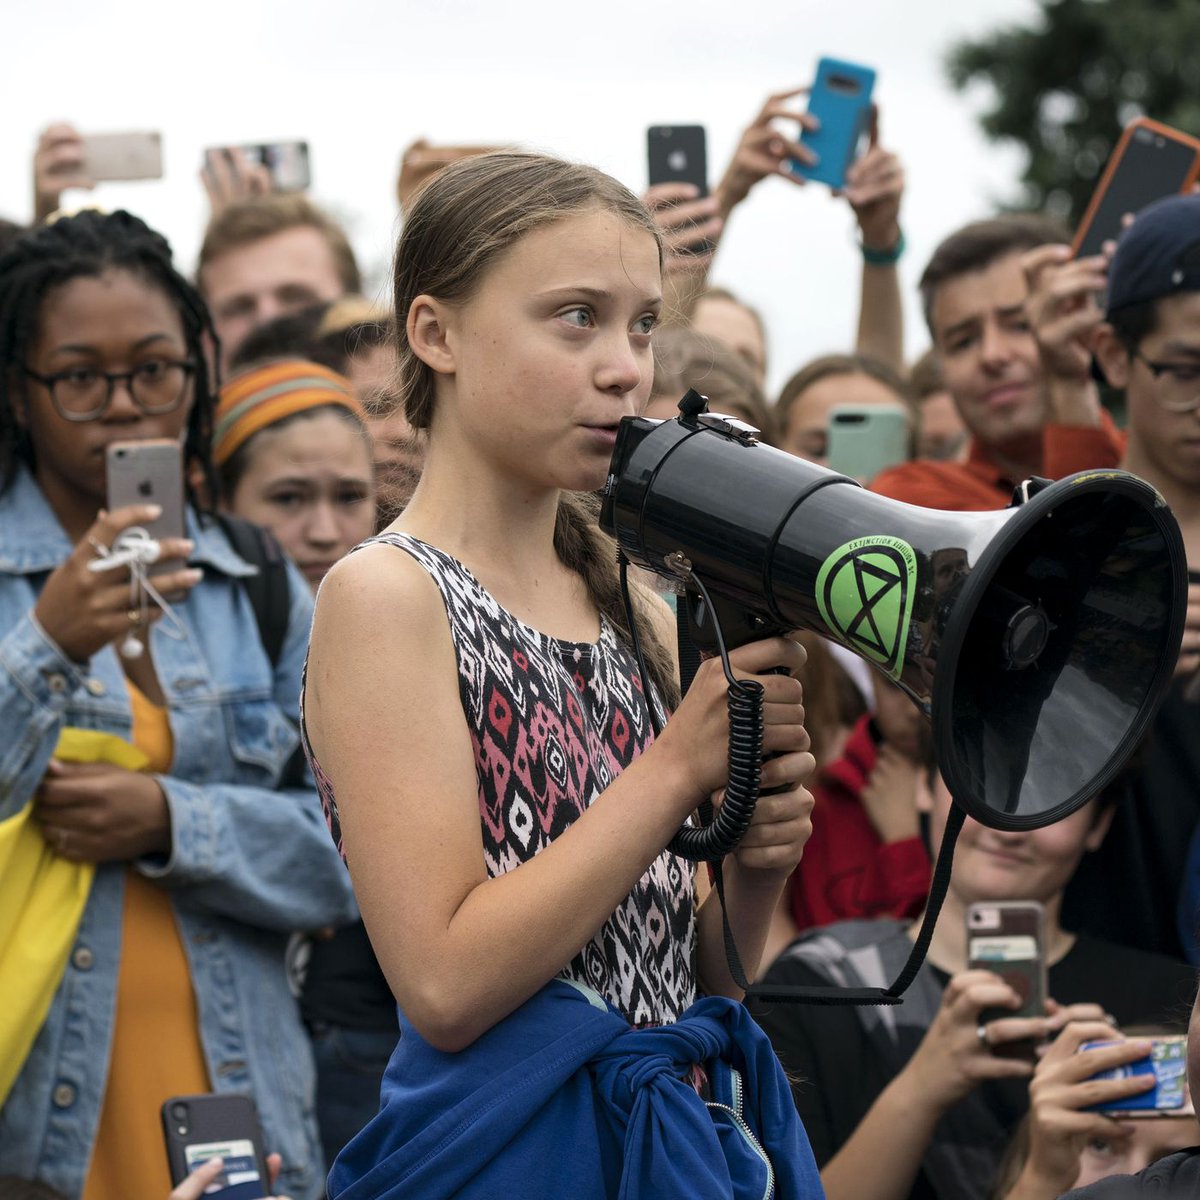 Greta Thunberg on the future of climate activism: "It isn’t going to be the politicians who suddenly realize there’s a climate crisis...But by influencing all people in general, we can build that pressure towards elected officials. That’s how a democracy works." #TIFF20  